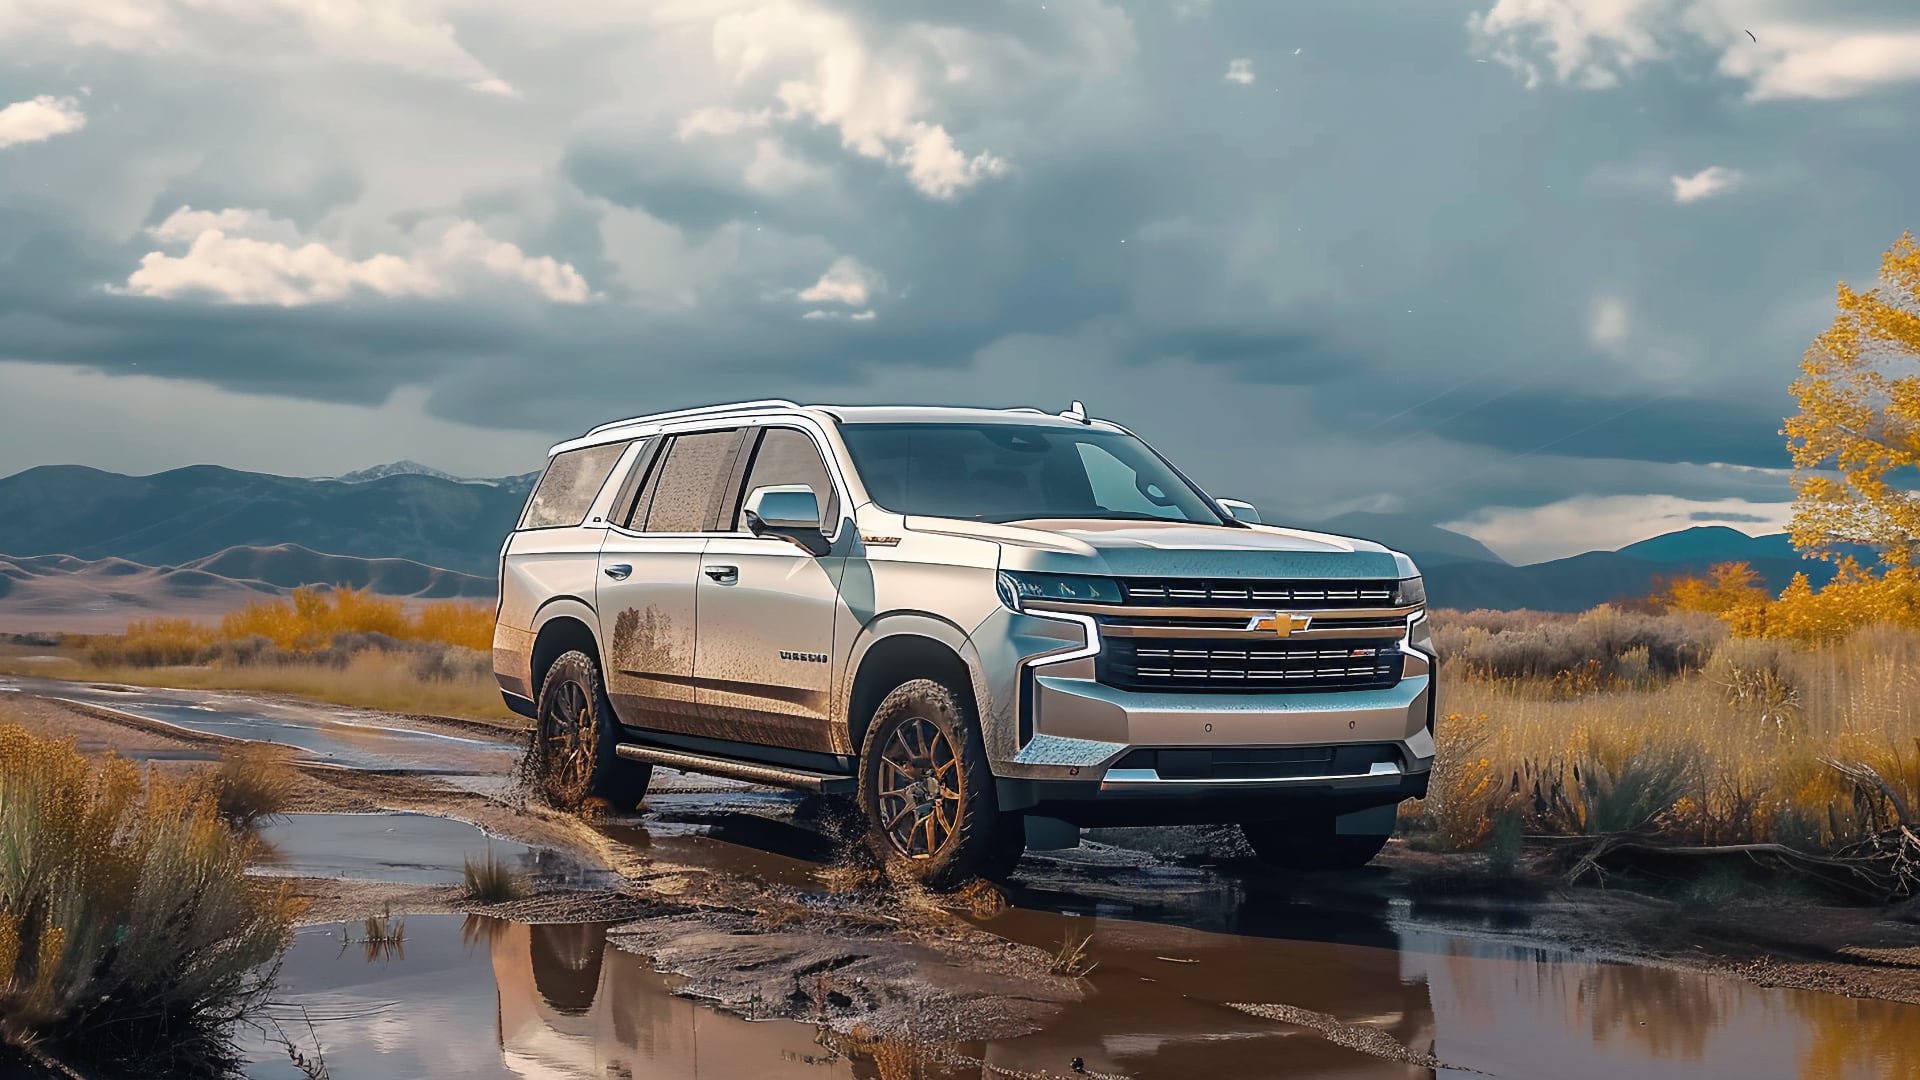 The 2020 Chevrolet Tahoe, one of the exceptional Chevy Tahoe years to avoid, fearlessly maneuvers through a treacherous muddy field.